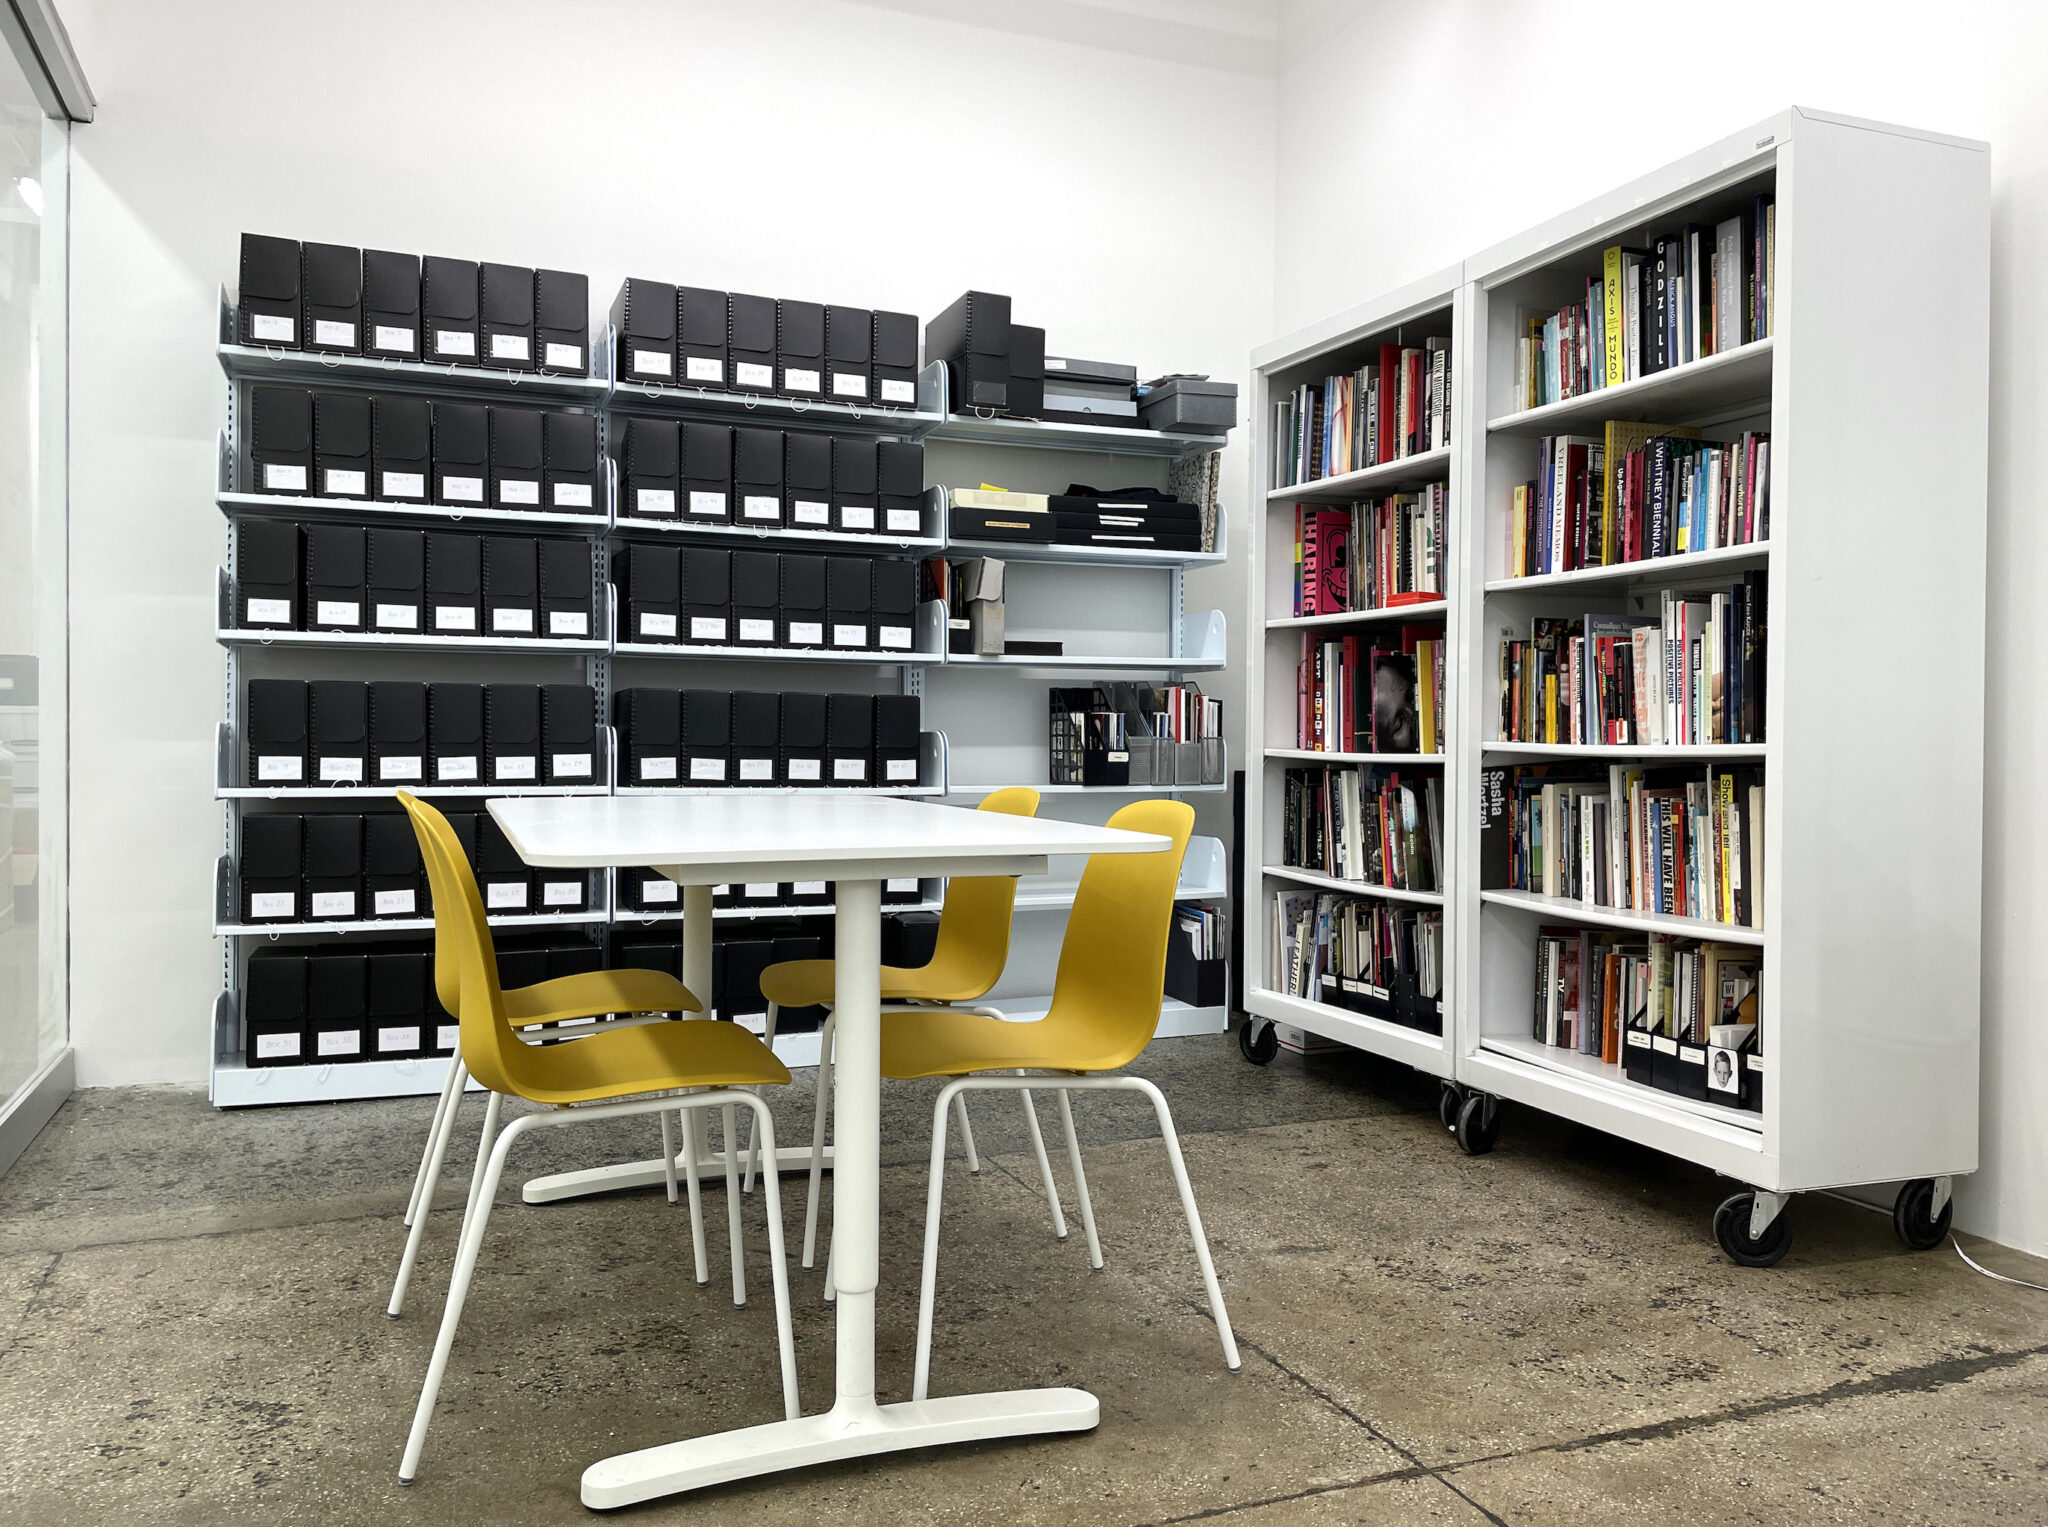 The Visual AIDS Archive Study Room, located in the Visual AIDS office in Chelsea